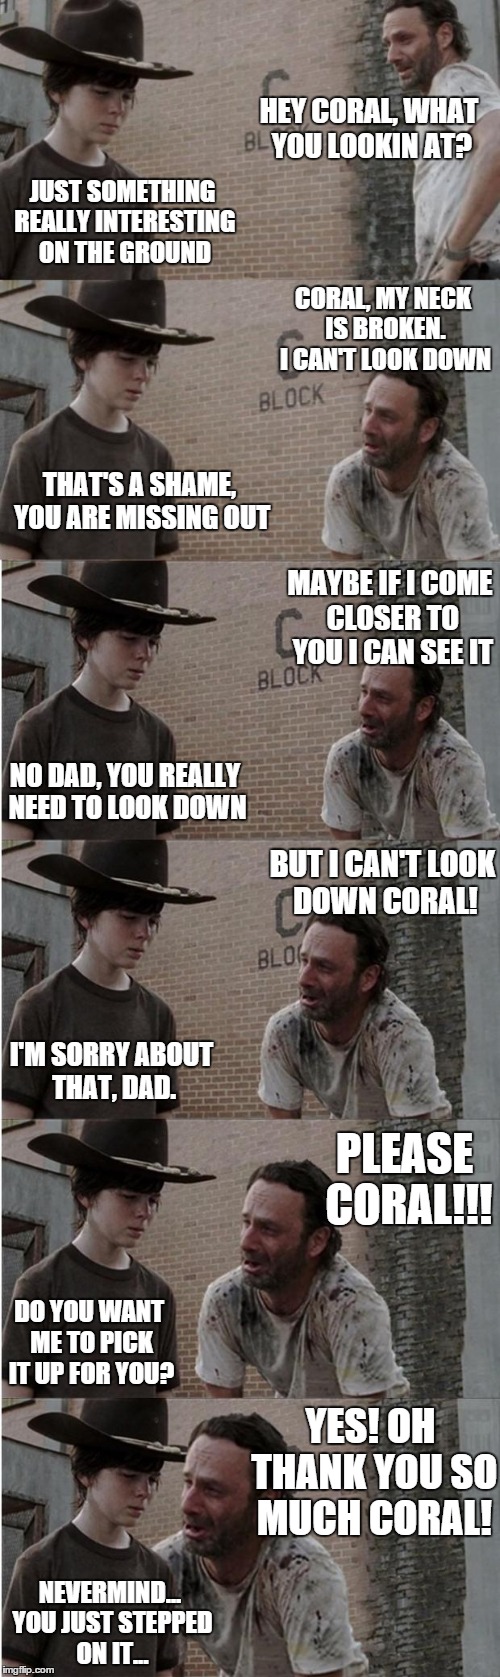 Rick and Carl Longer Meme | HEY CORAL, WHAT YOU LOOKIN AT? NEVERMIND... YOU JUST STEPPED ON IT... JUST SOMETHING REALLY INTERESTING ON THE GROUND CORAL, MY NECK IS BROK | image tagged in memes,rick and carl longer | made w/ Imgflip meme maker